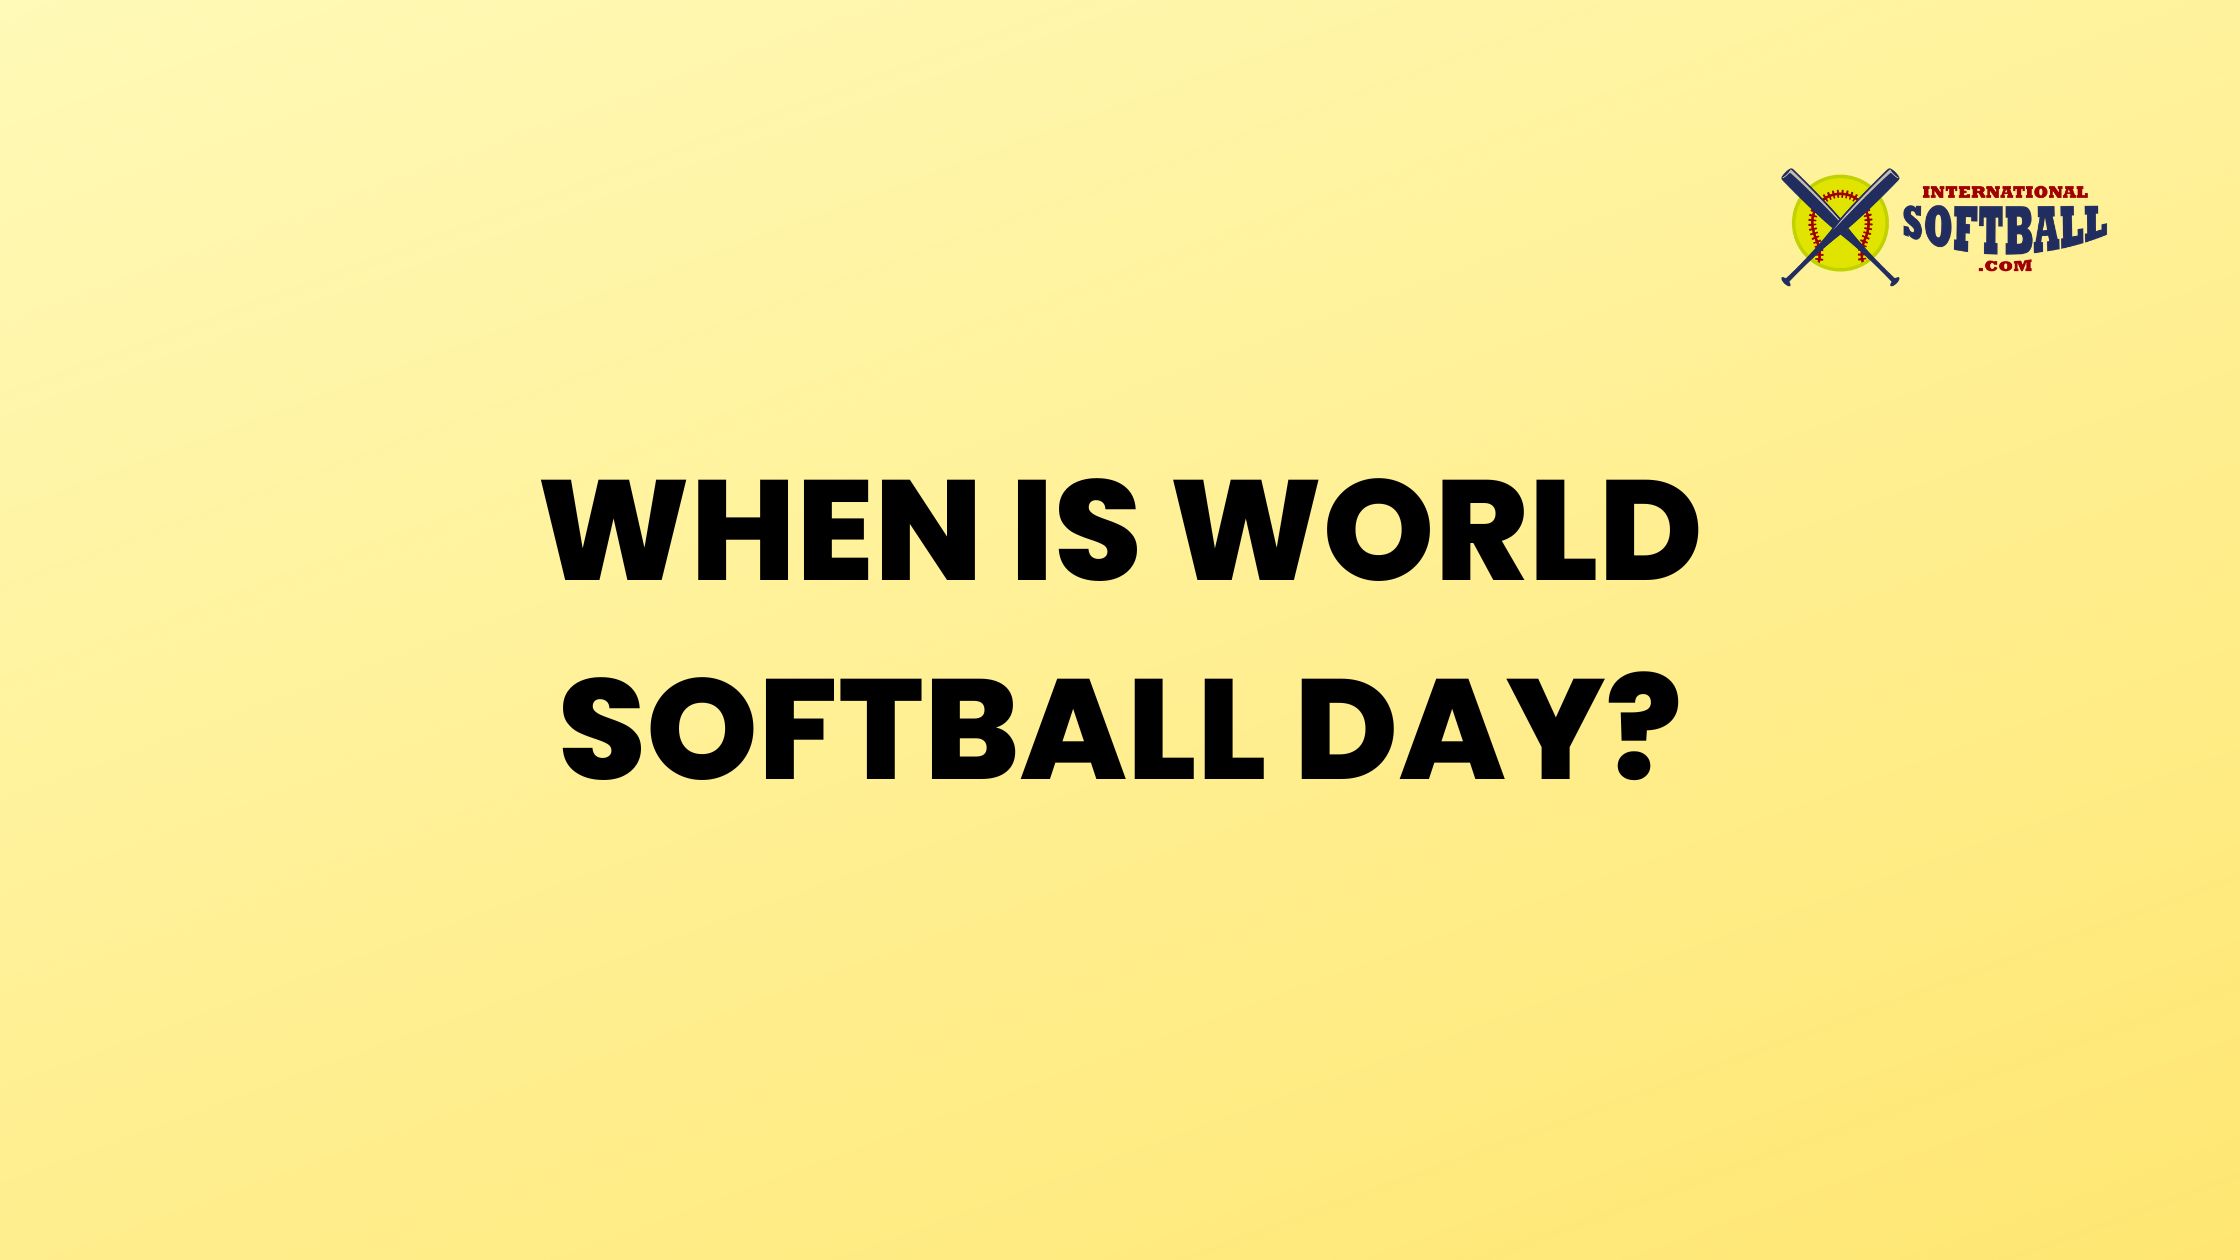 WHEN IS WORLD SOFTBALL DAY